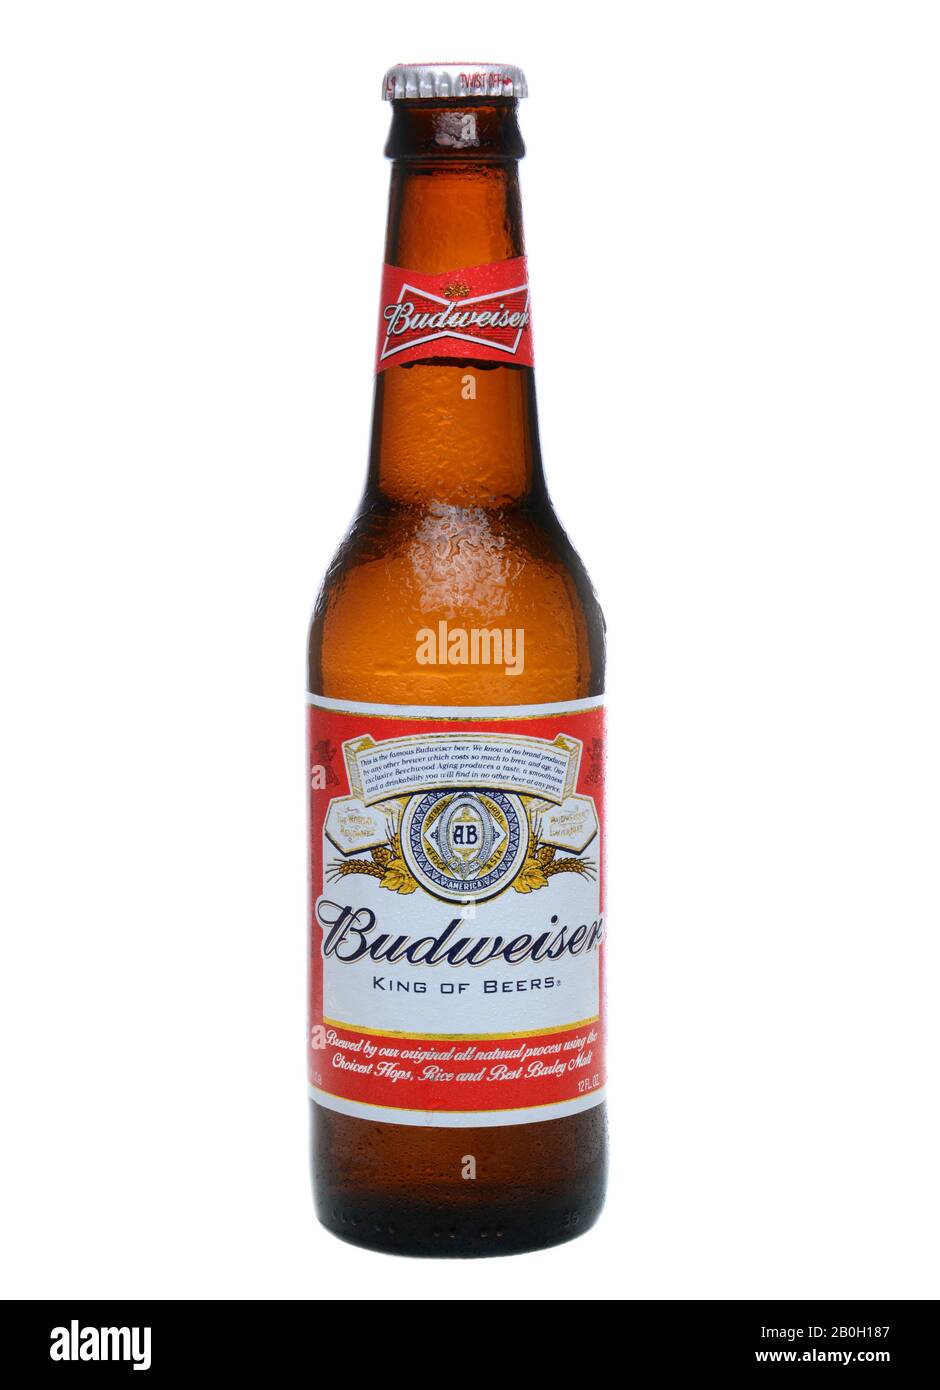 IRVINE, CA - MAY 27, 2014: A single bottle of Budweiser on white with condensation. From Anheuser-Busch InBev, Budweiser is one of the top selling dom Stock Photo